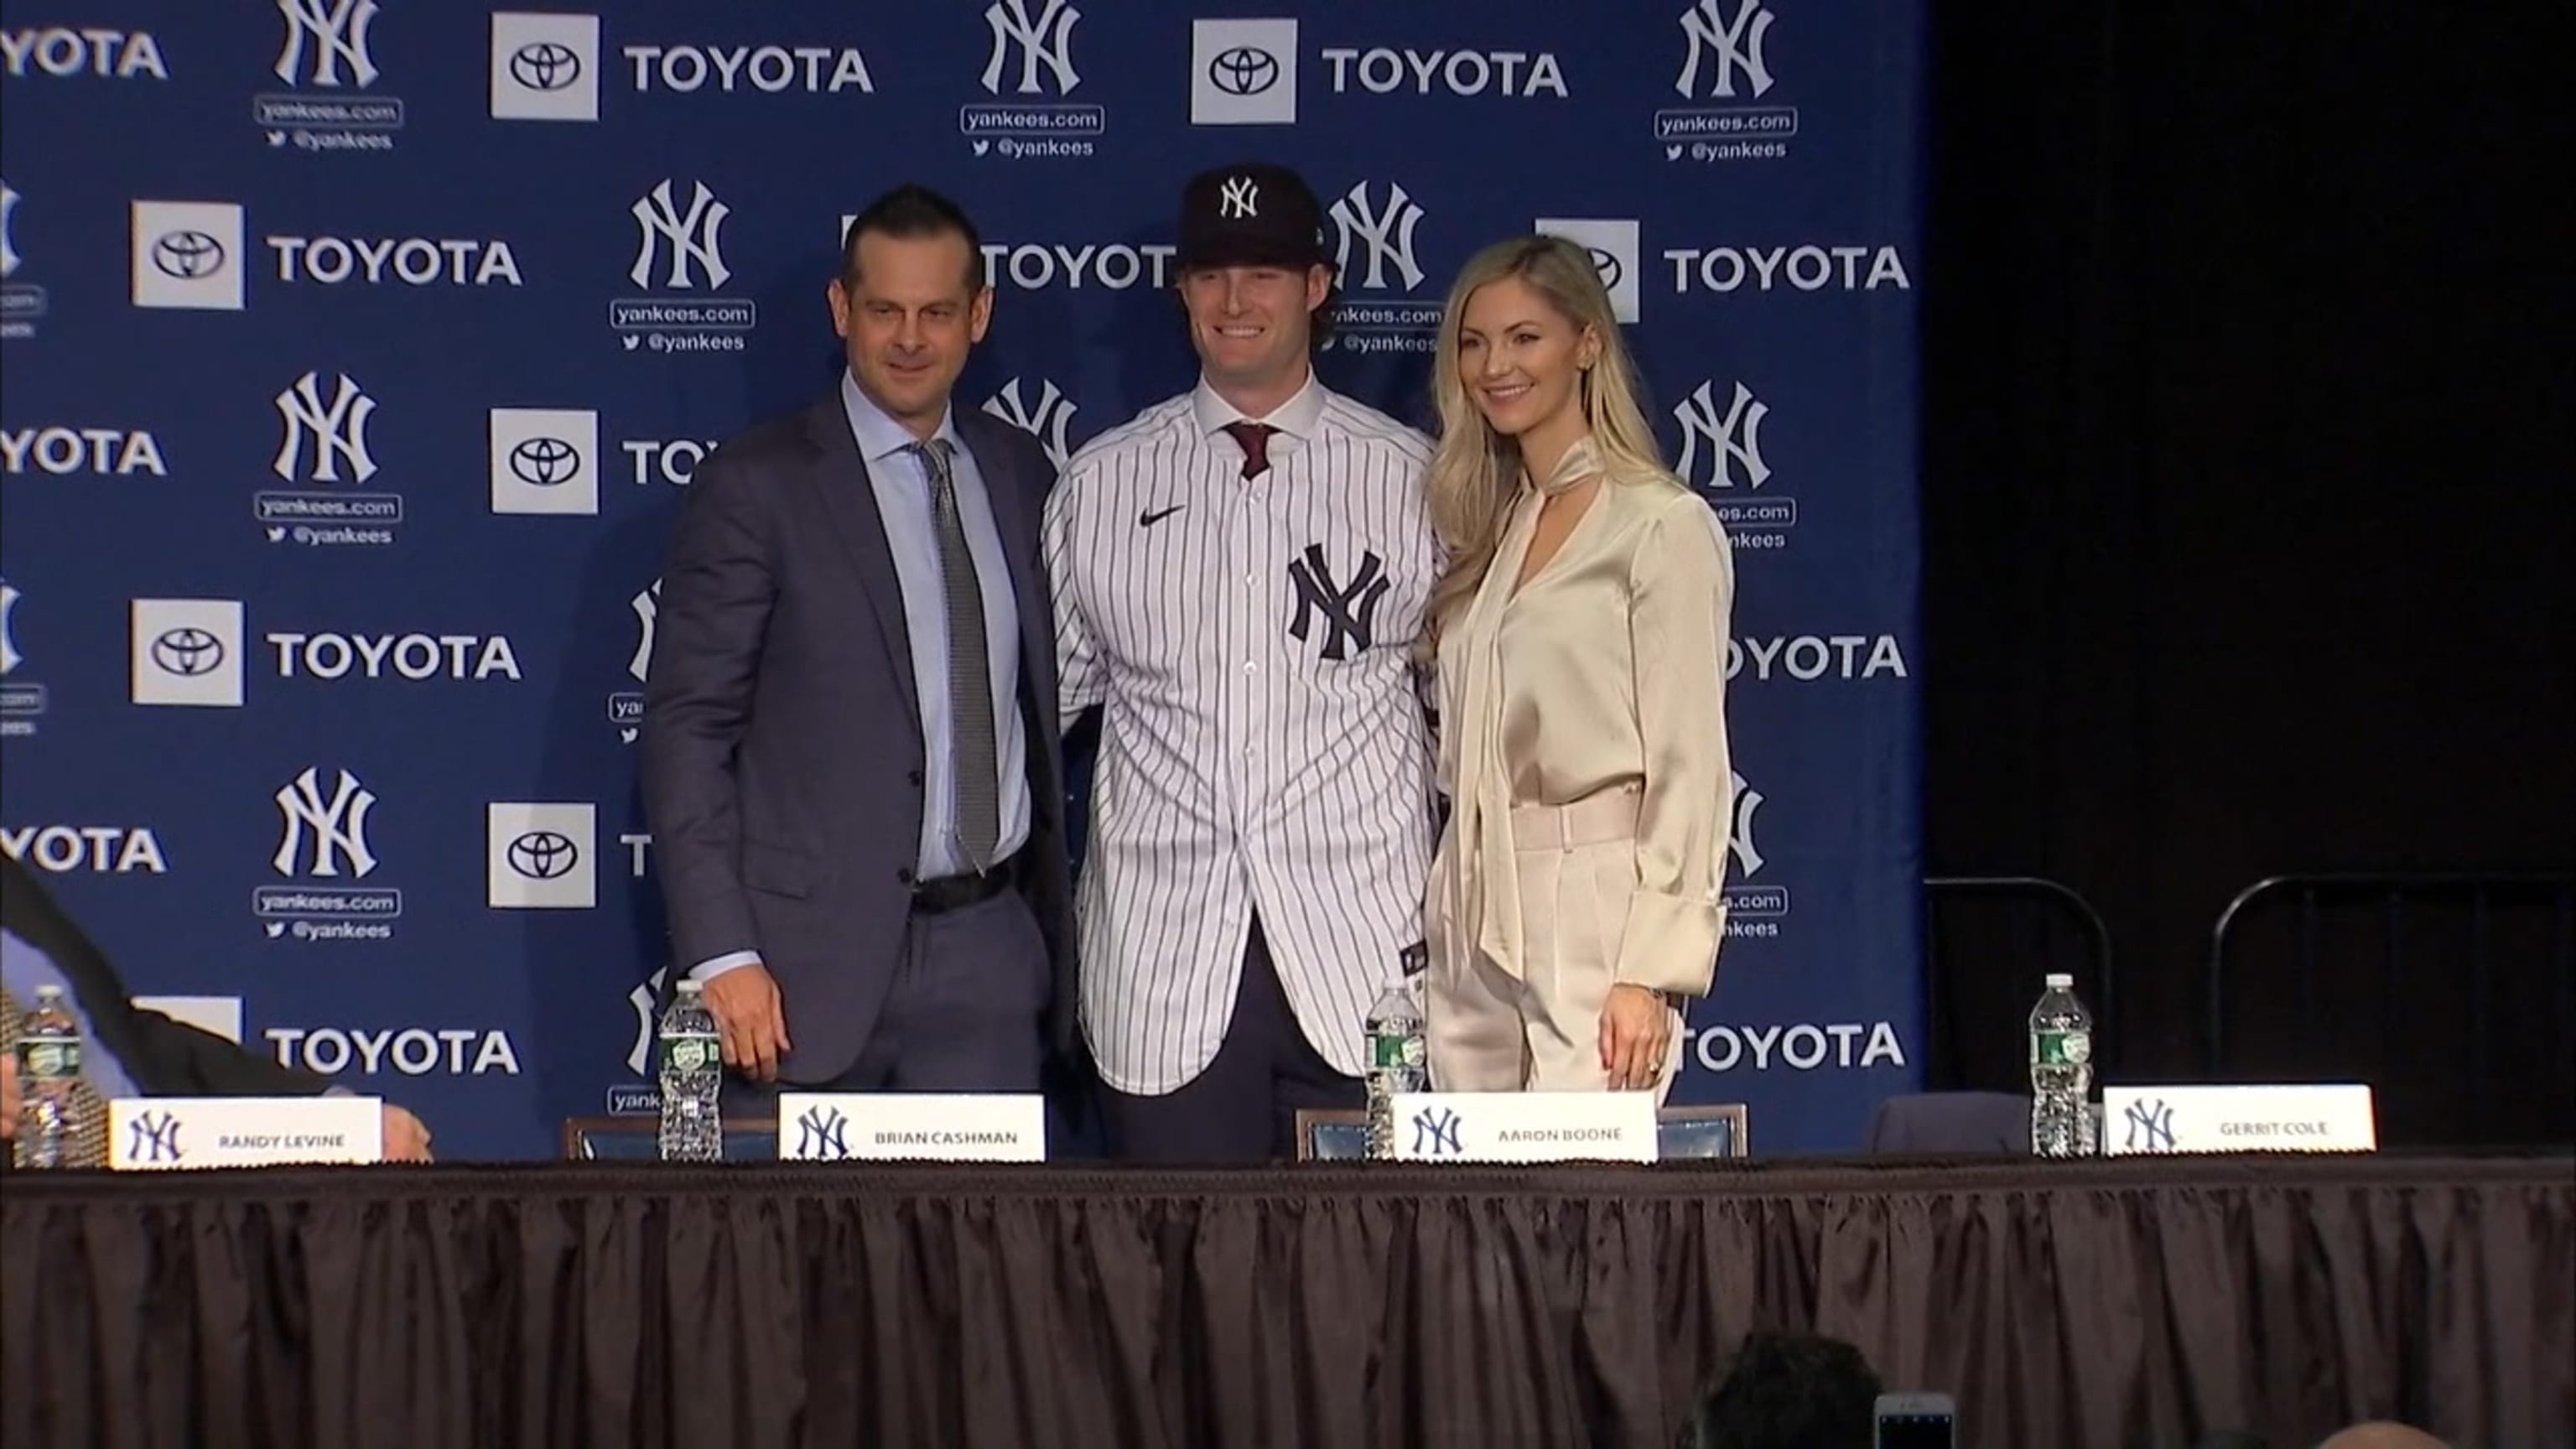 Gerrit Cole introduced with Yankees: The sign, razor burn and more from his  first New York press conference 